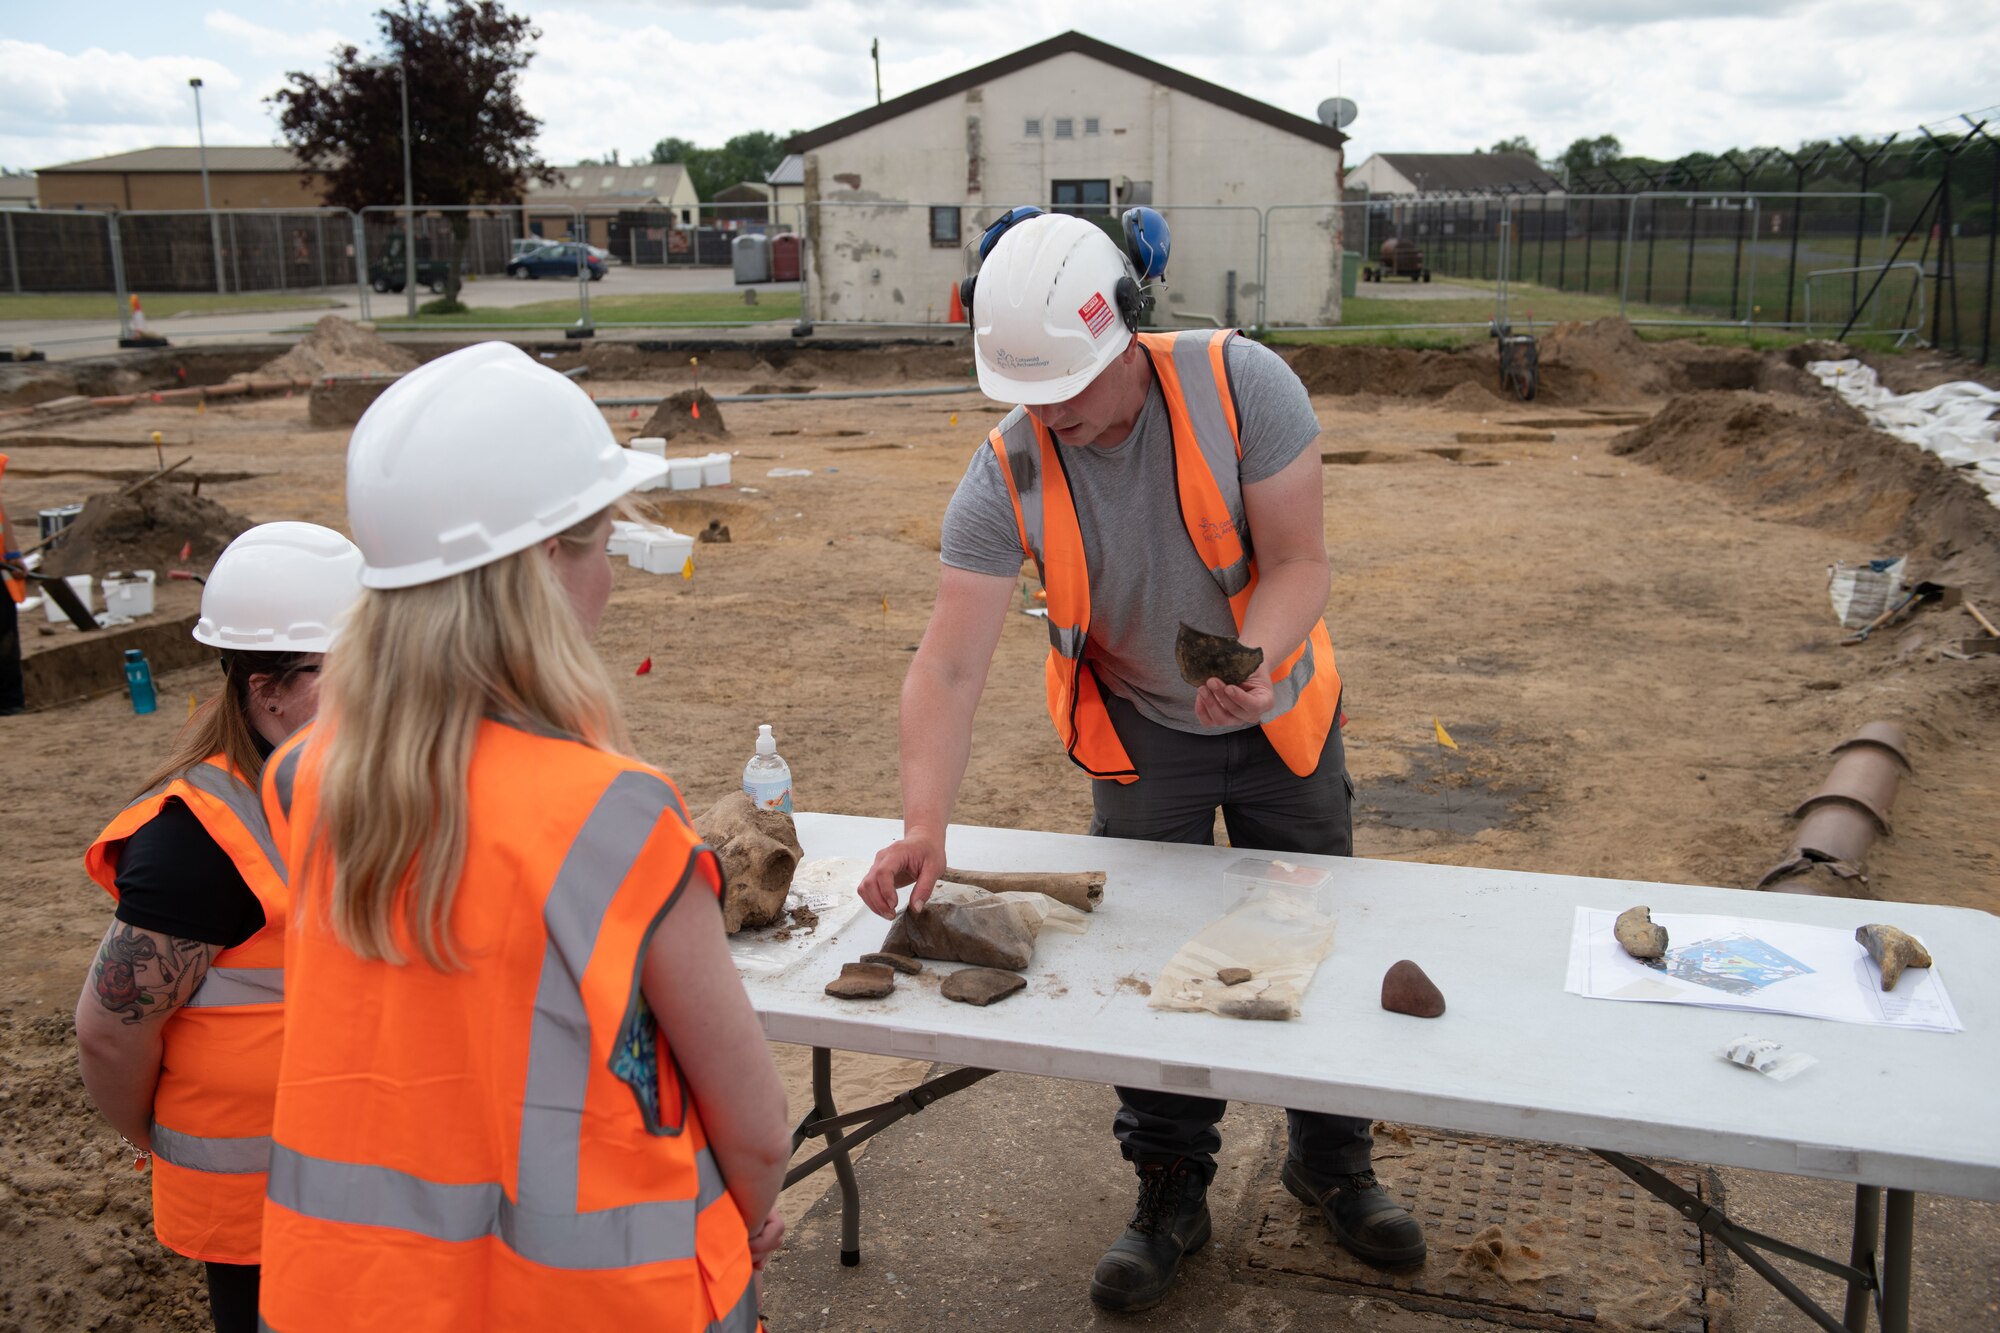 Michael Green, an archaeologist with Cotswold Archaeology, presents artifacts that were uncovered during an archaeological dig on Royal Air Force Lakenheath, England, June 10, 2021. Archaeologists are active team members during construction projects on base because of the abundance of history buried beneath the soil. (U.S. Air Force photo by Airman 1st Class Cedrique Oldaker)